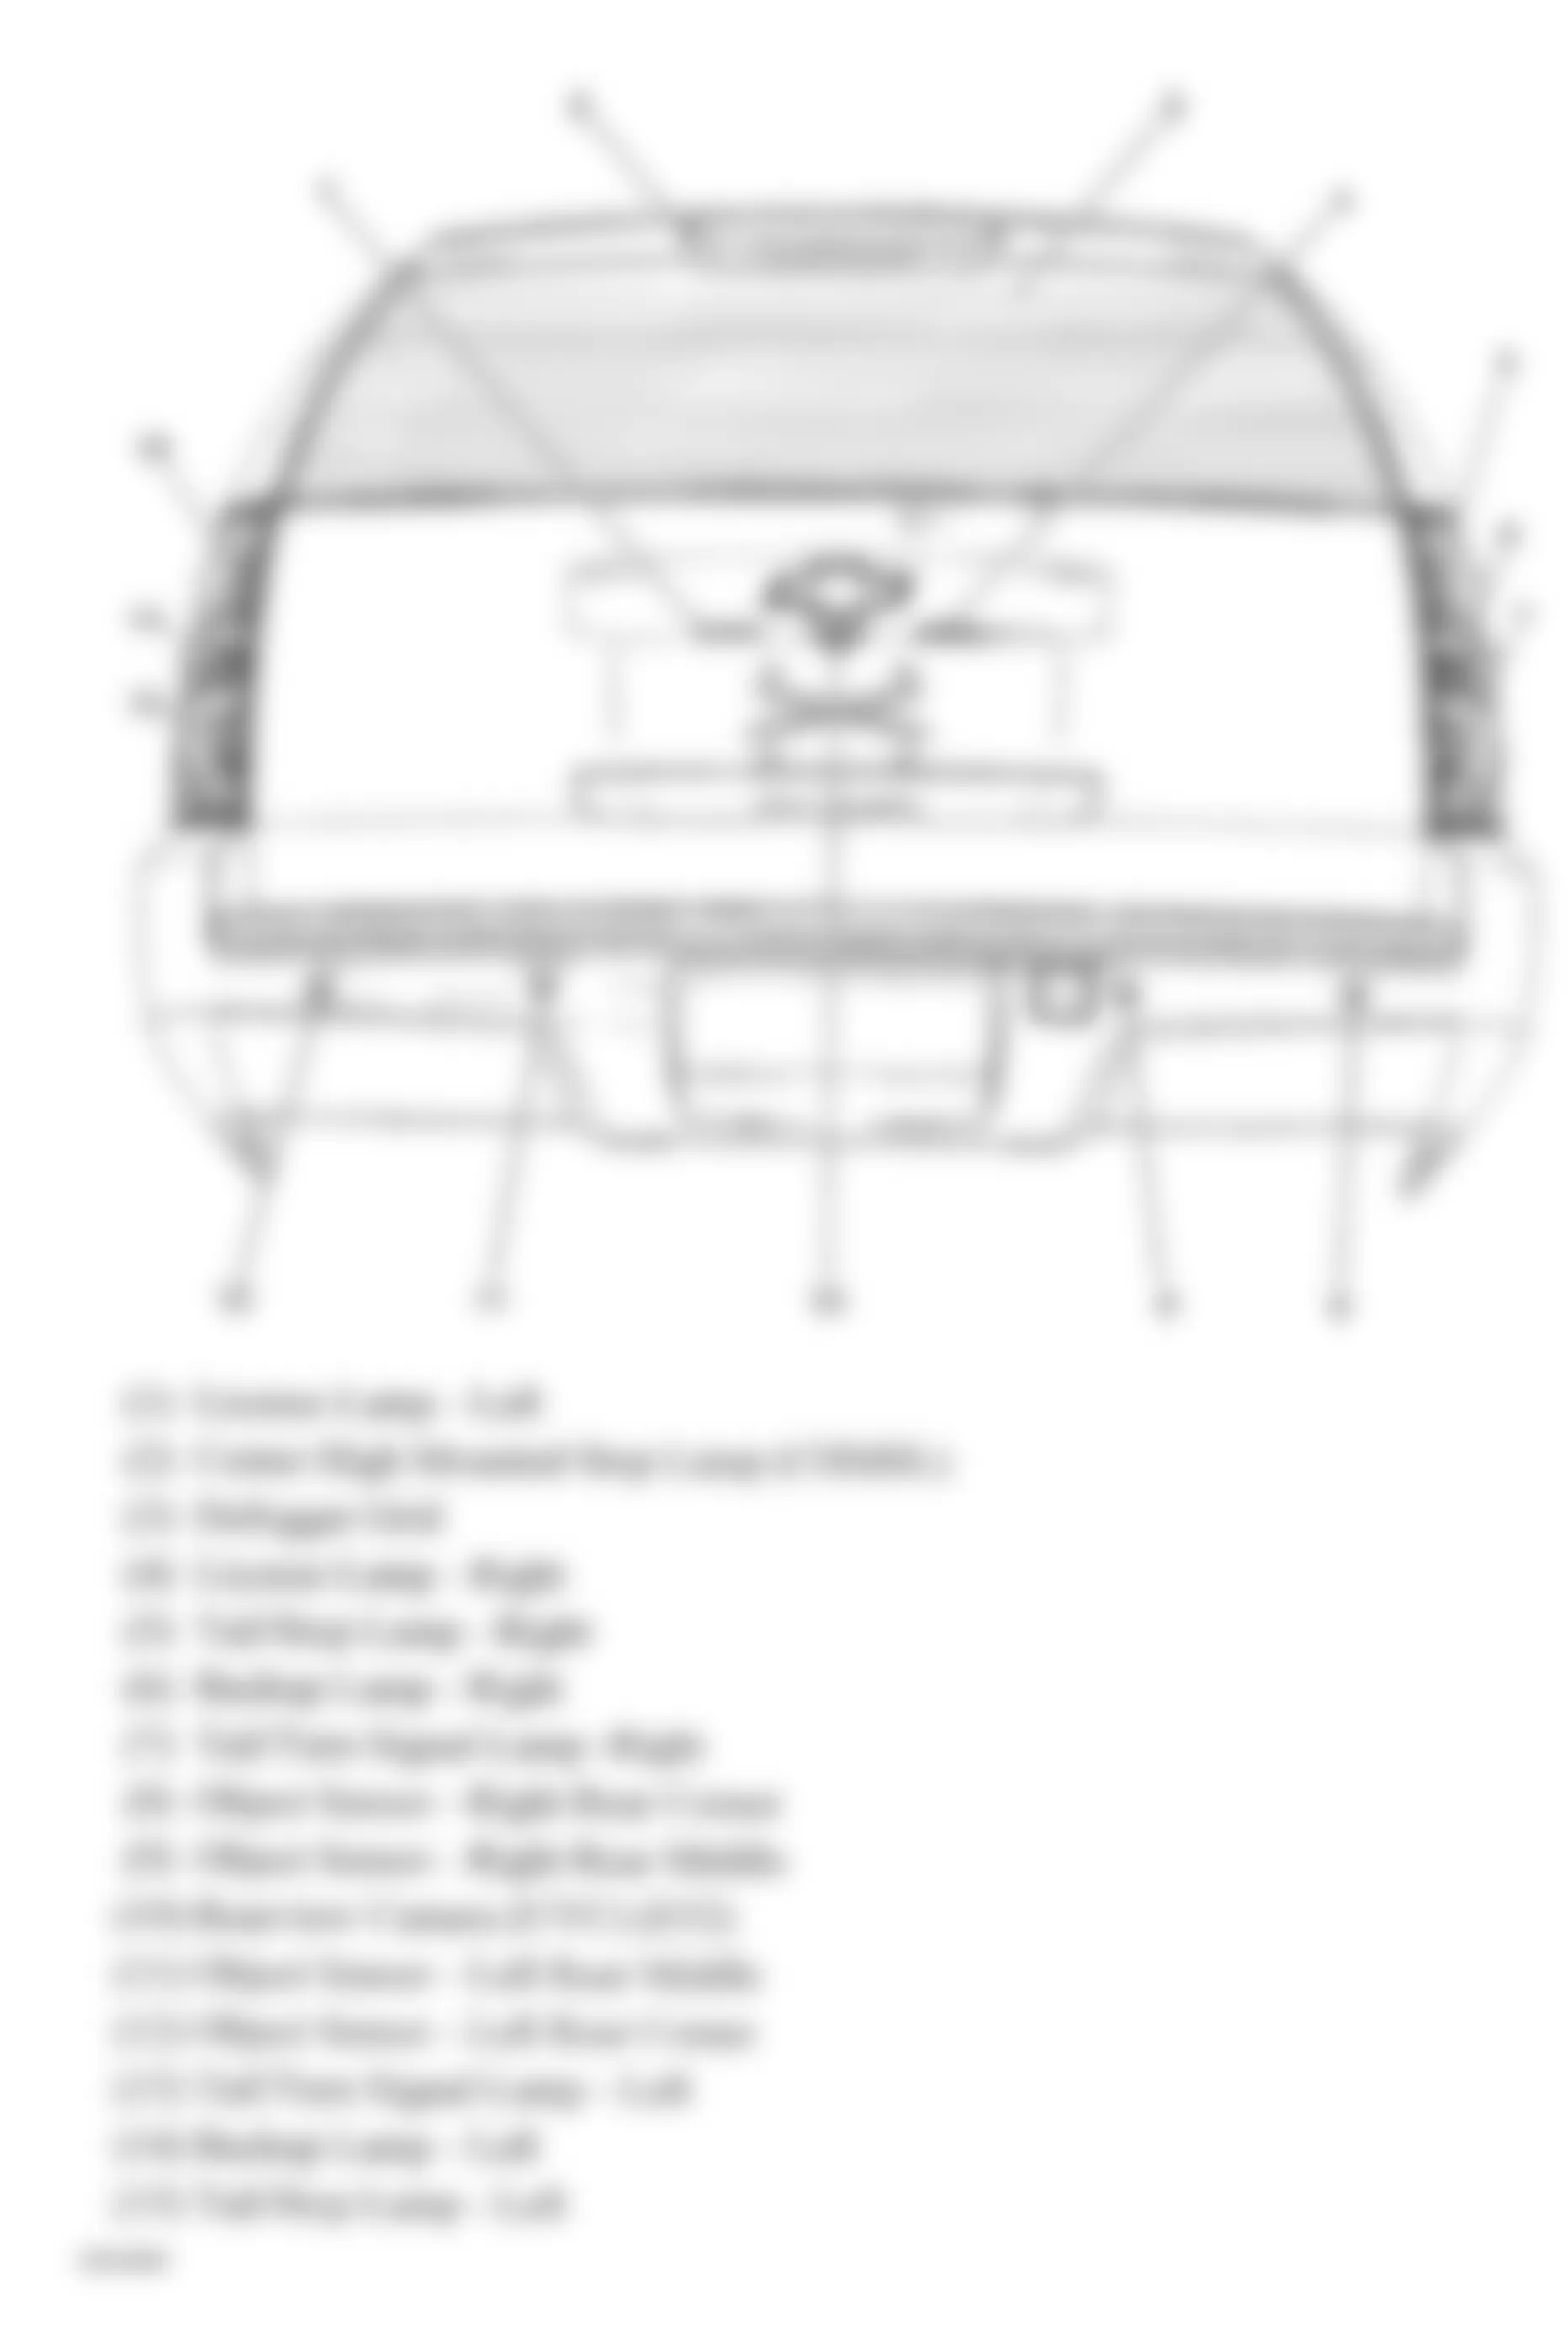 Chevrolet Avalanche 2010 - Component Locations -  Rear Of Vehicle (Avalanche, Suburban & Tahoe W/One Piece Liftgate)